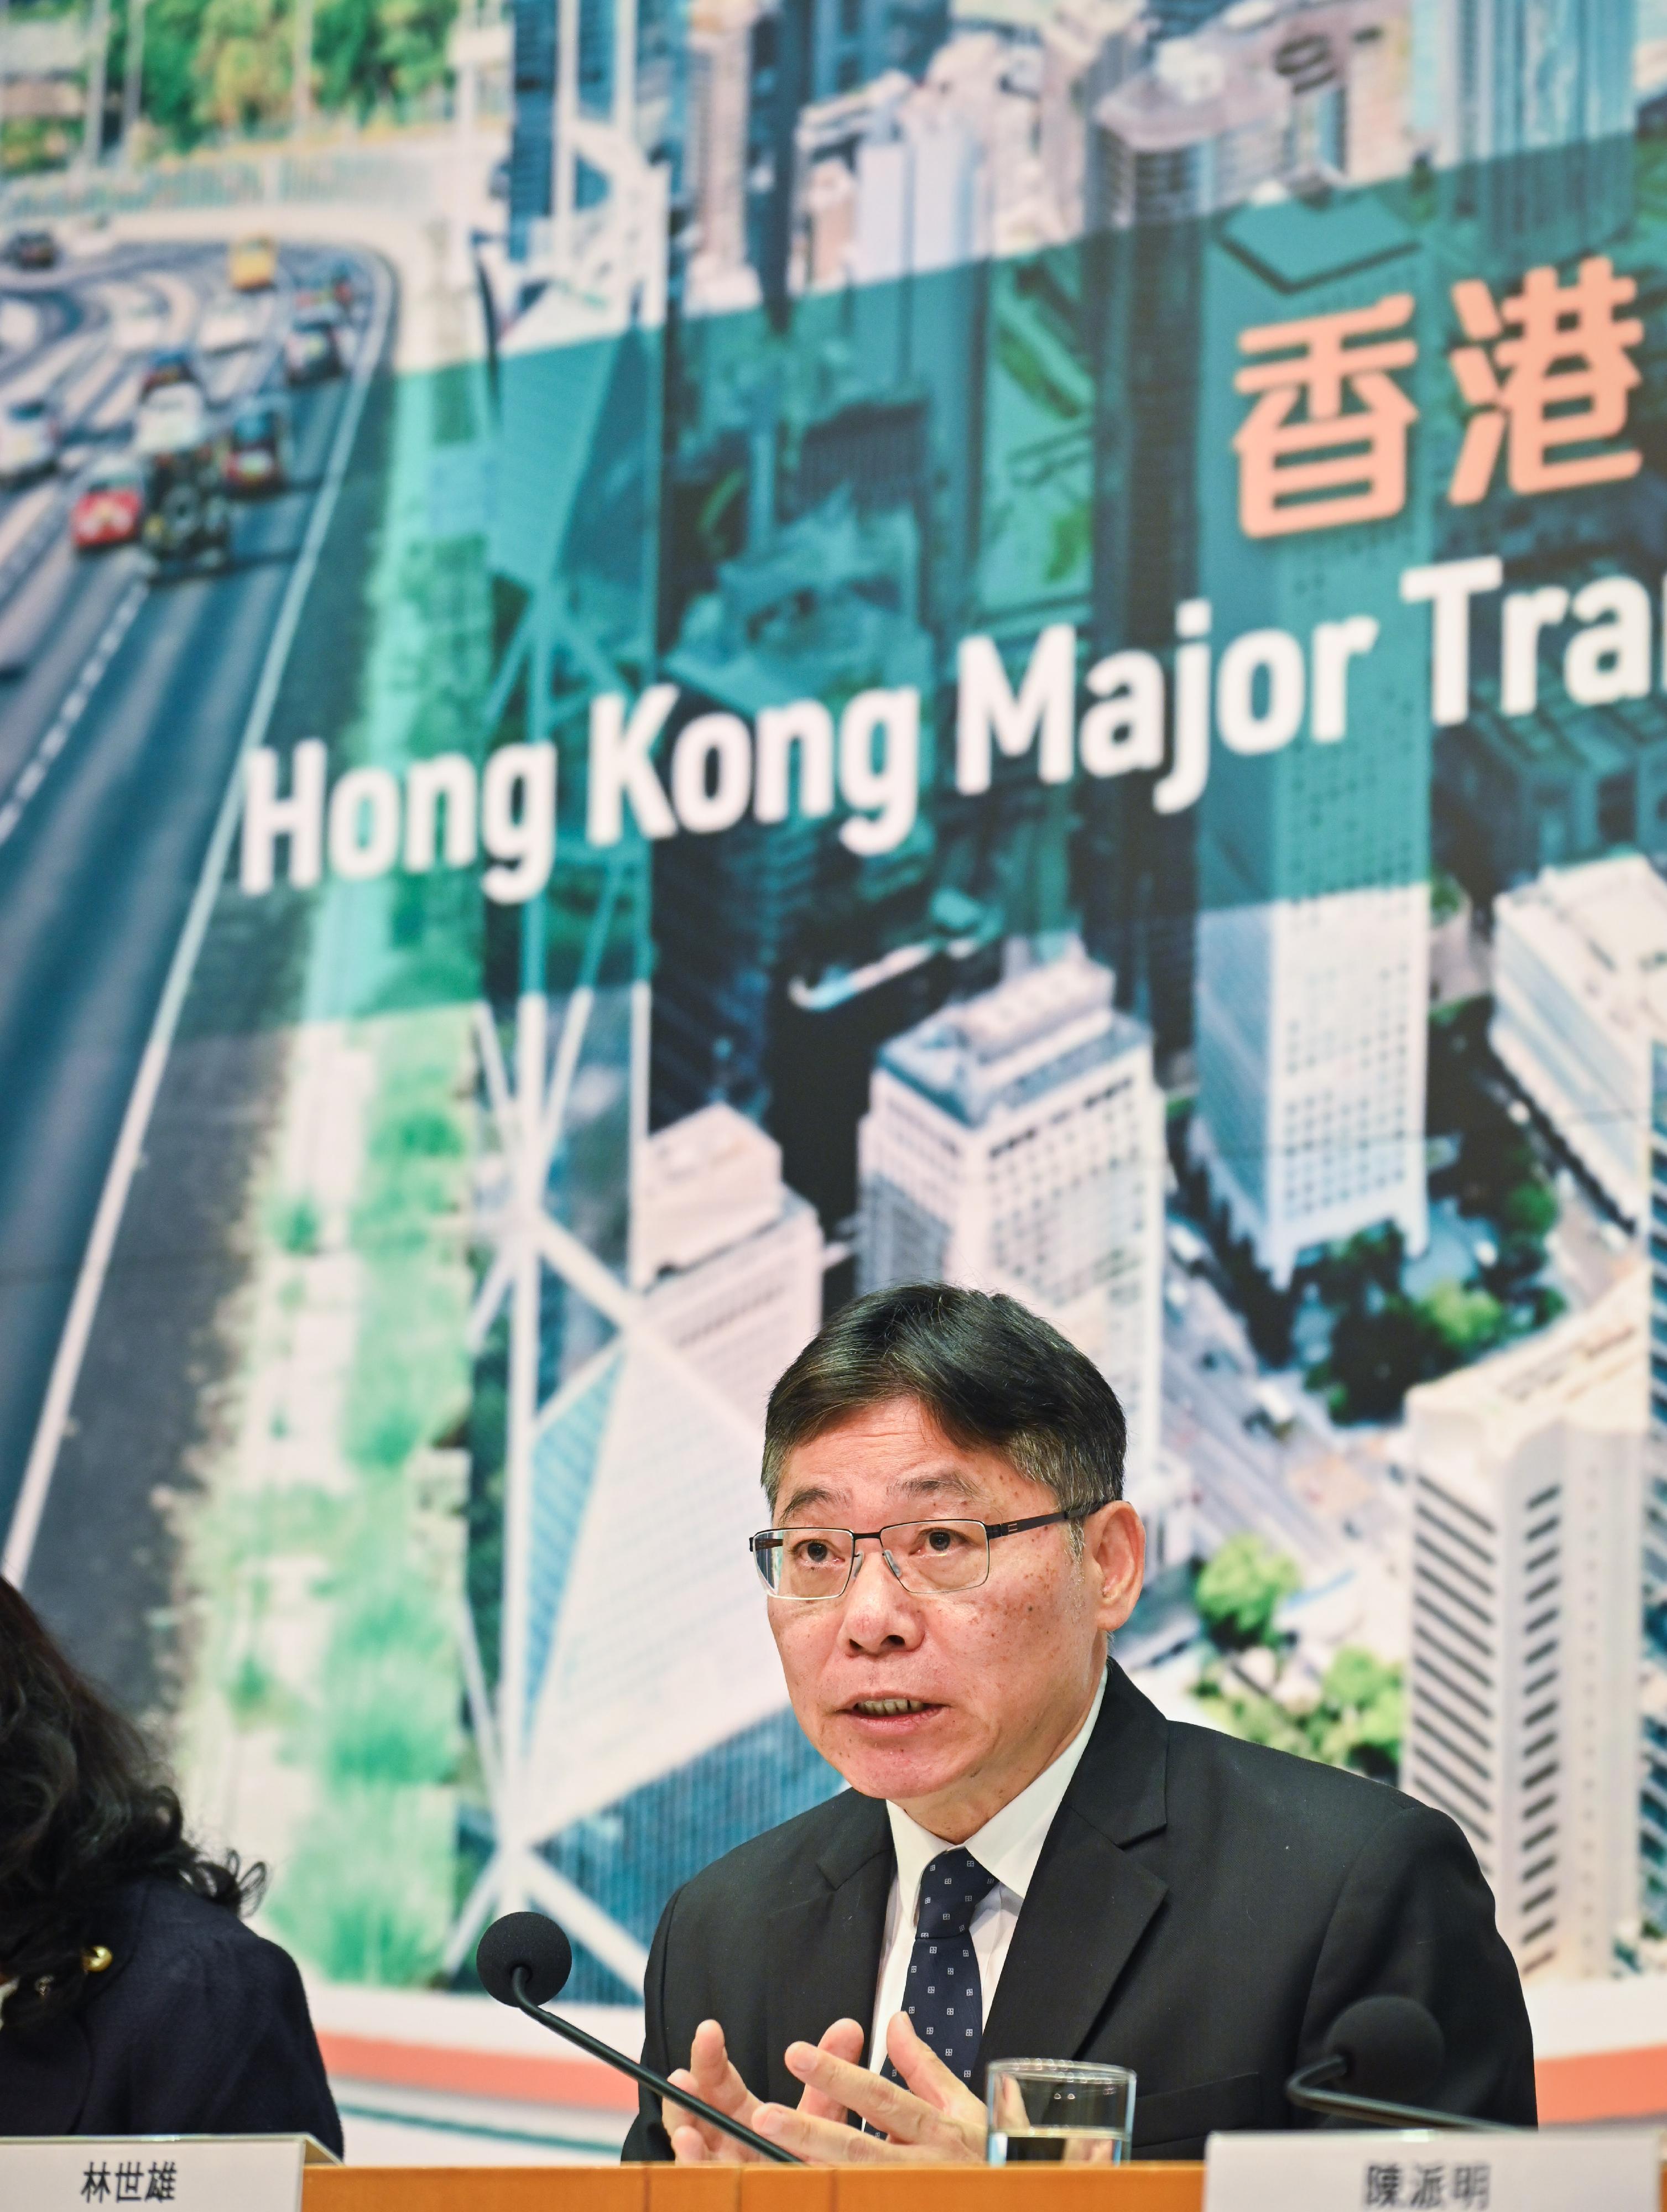 The Secretary for Transport and Logistics, Mr Lam Sai-hung, illustrates the vision and objectives of the Blueprint at the press conference on the Hong Kong Major Transport Infrastructure Development Blueprint today (December 12).